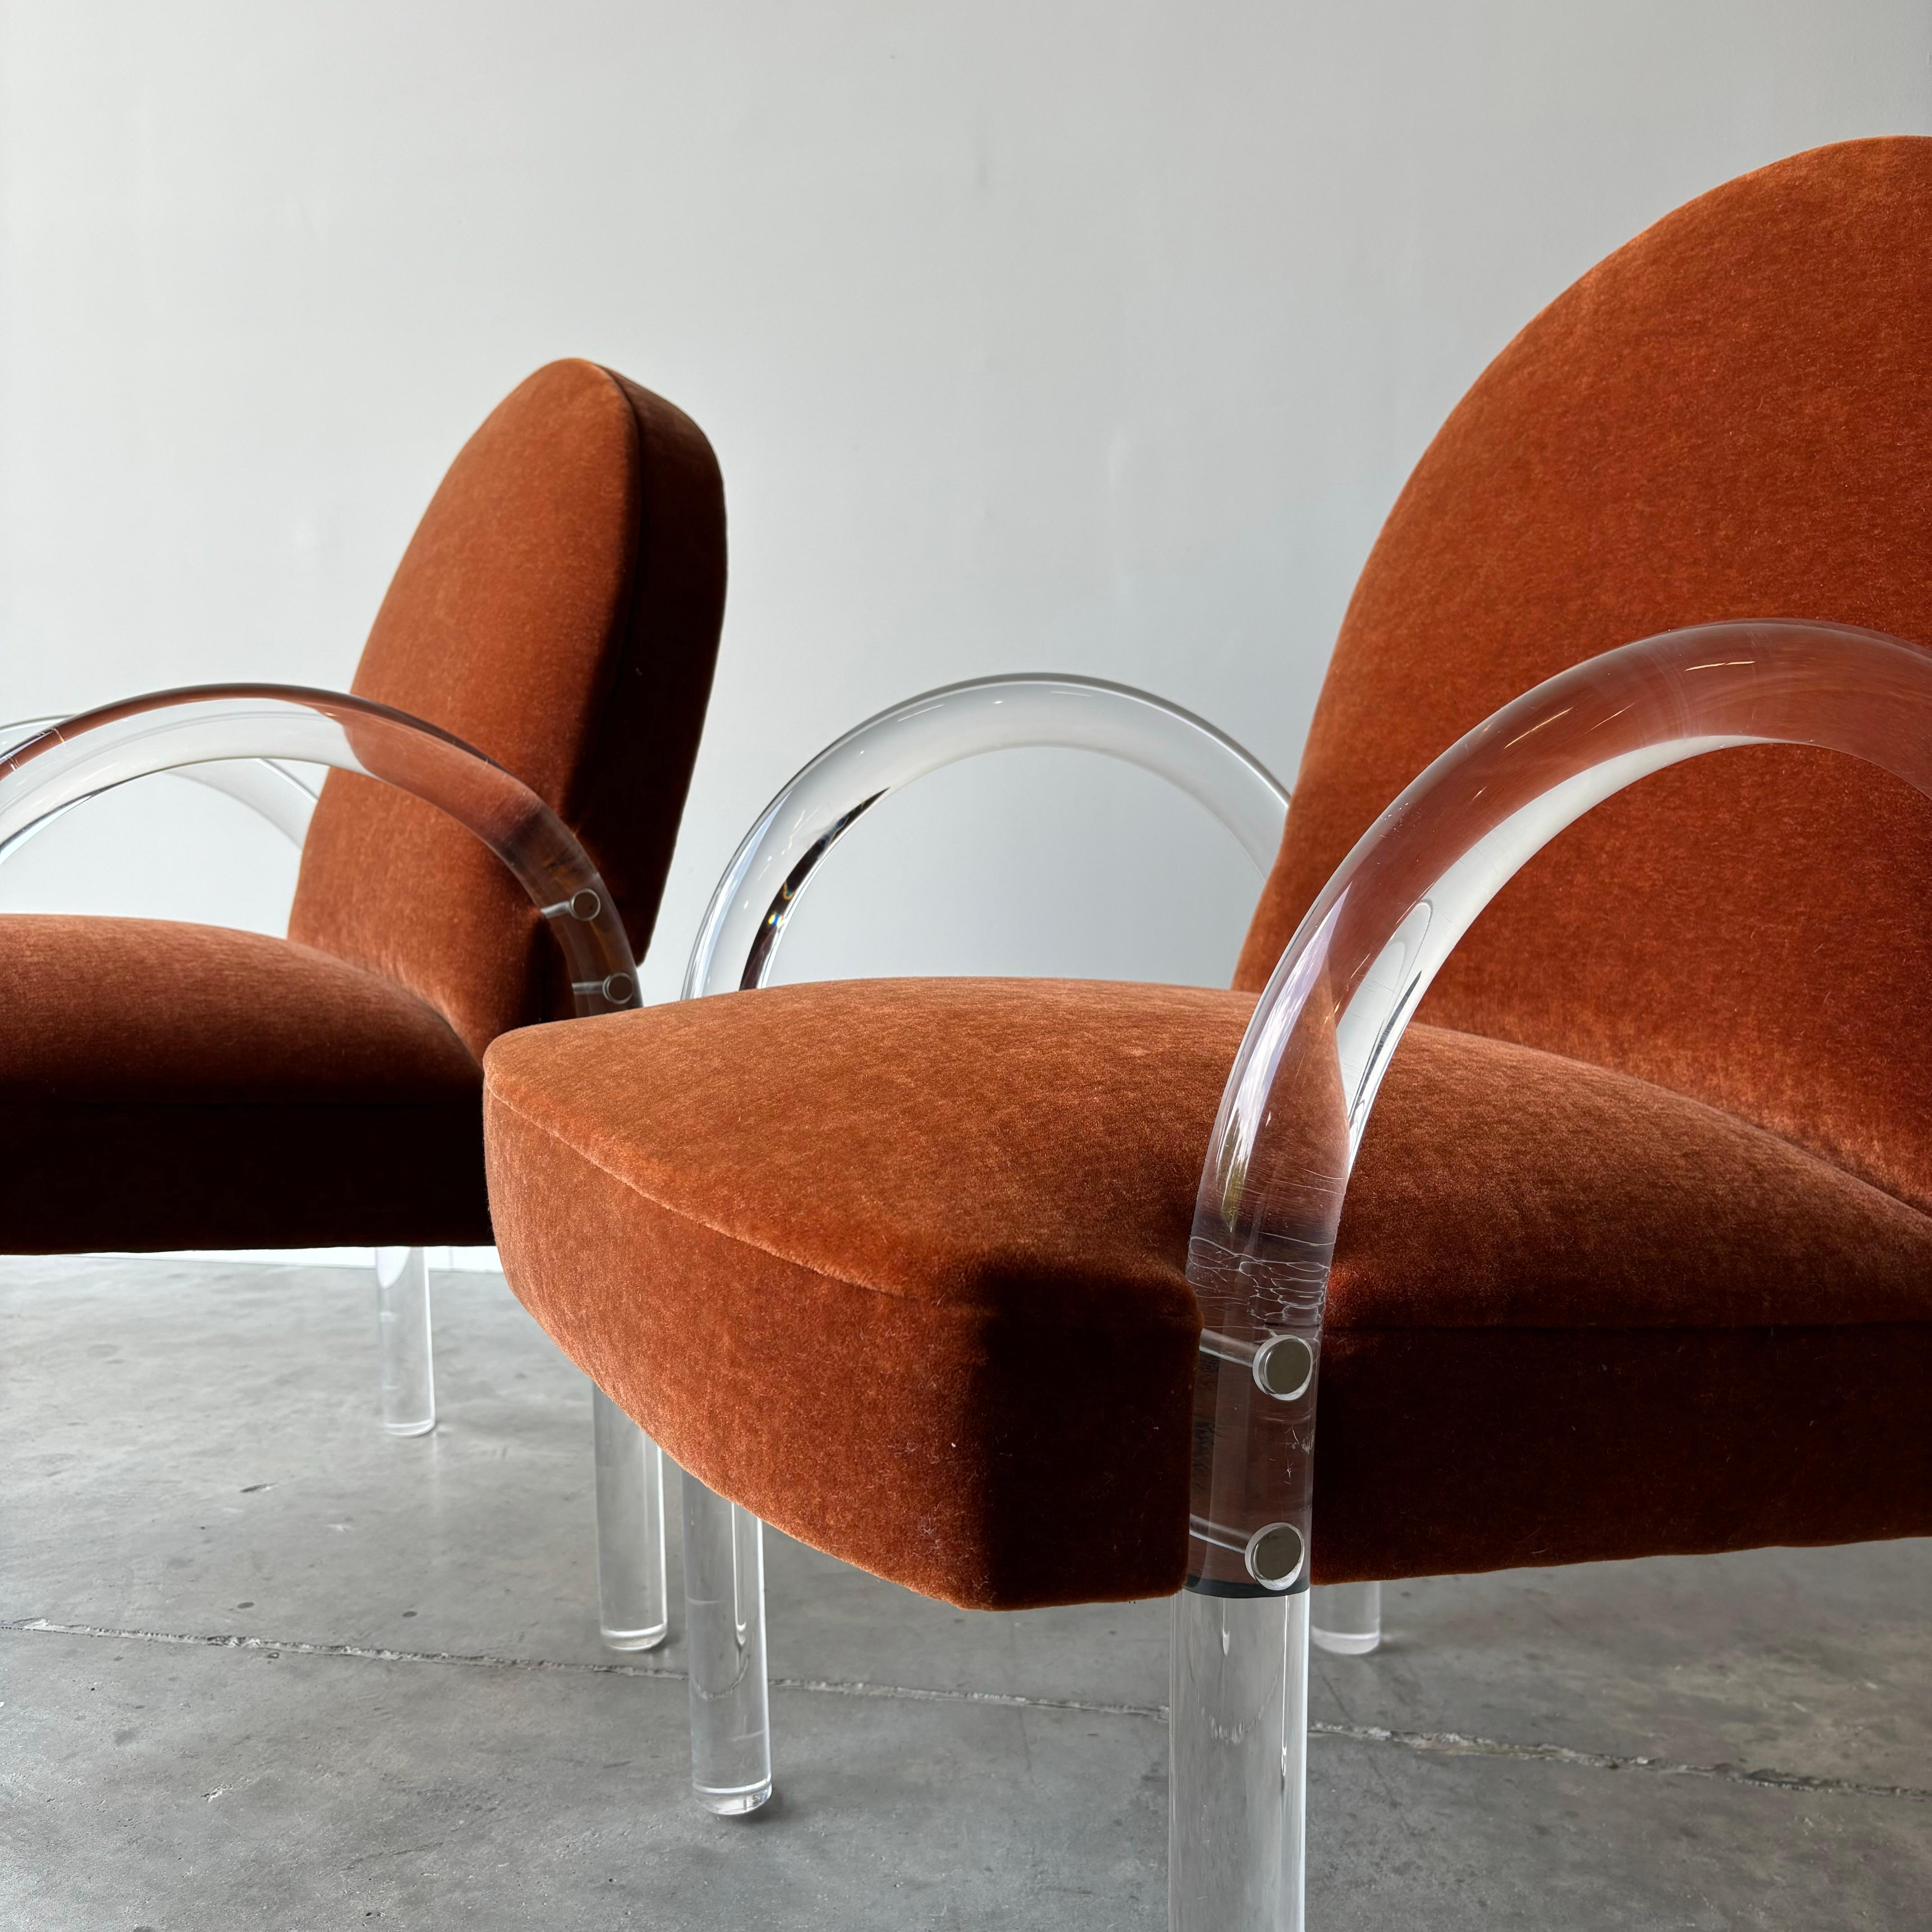 A pair of chairs by Pace. Thick Lucite arms and mohair upholstered seats. The design is clean and to the point. 
The chairs are well proportioned and comfortable, and work as a great pair of occasional lounge chairs.

Lucite shows hairline fissures